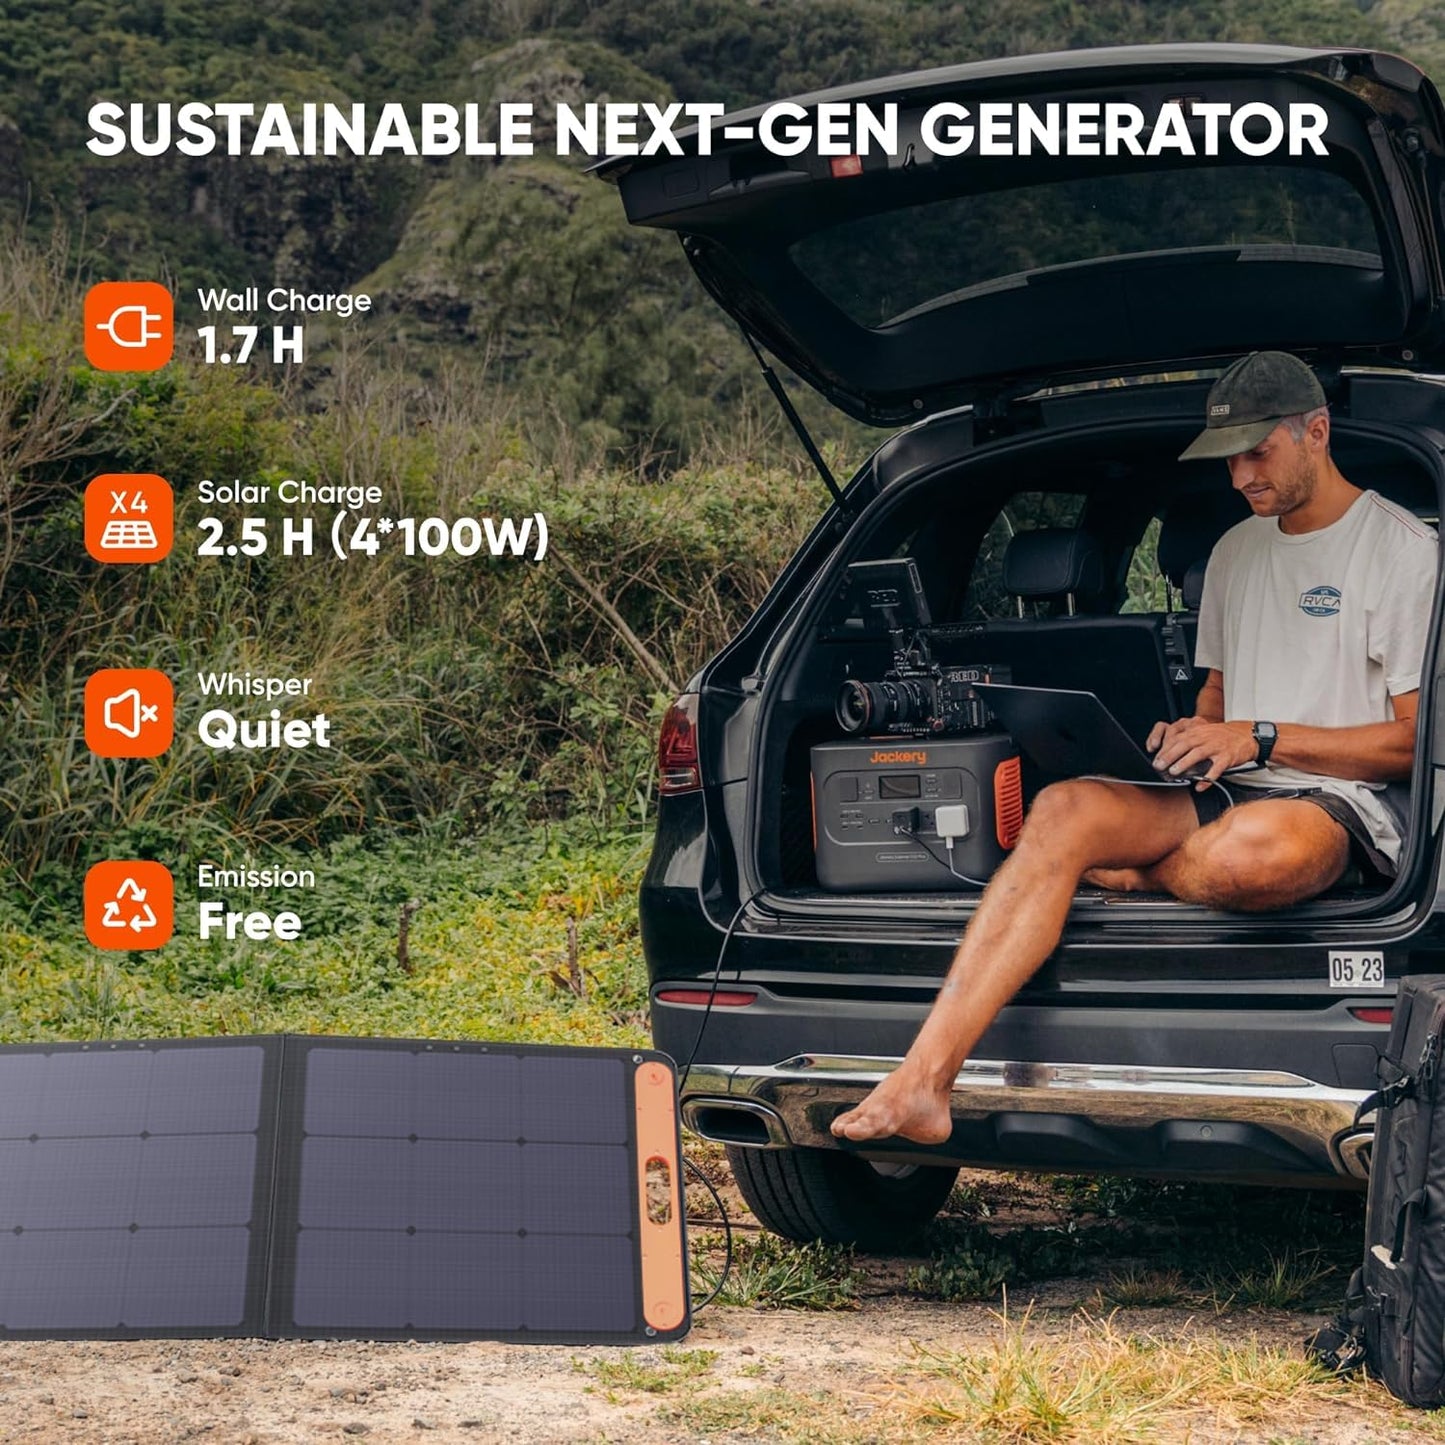 Jackery Explorer 700 Plus Portable Power Station + SolarSaga 100W Solar Panel, 681Wh 1000W (2000W Peak) Solar Generator Lithium LiFePO4 Battery Backup with BMS Protections for Outdoors, Camping Solar Generator 700 Plus 100W